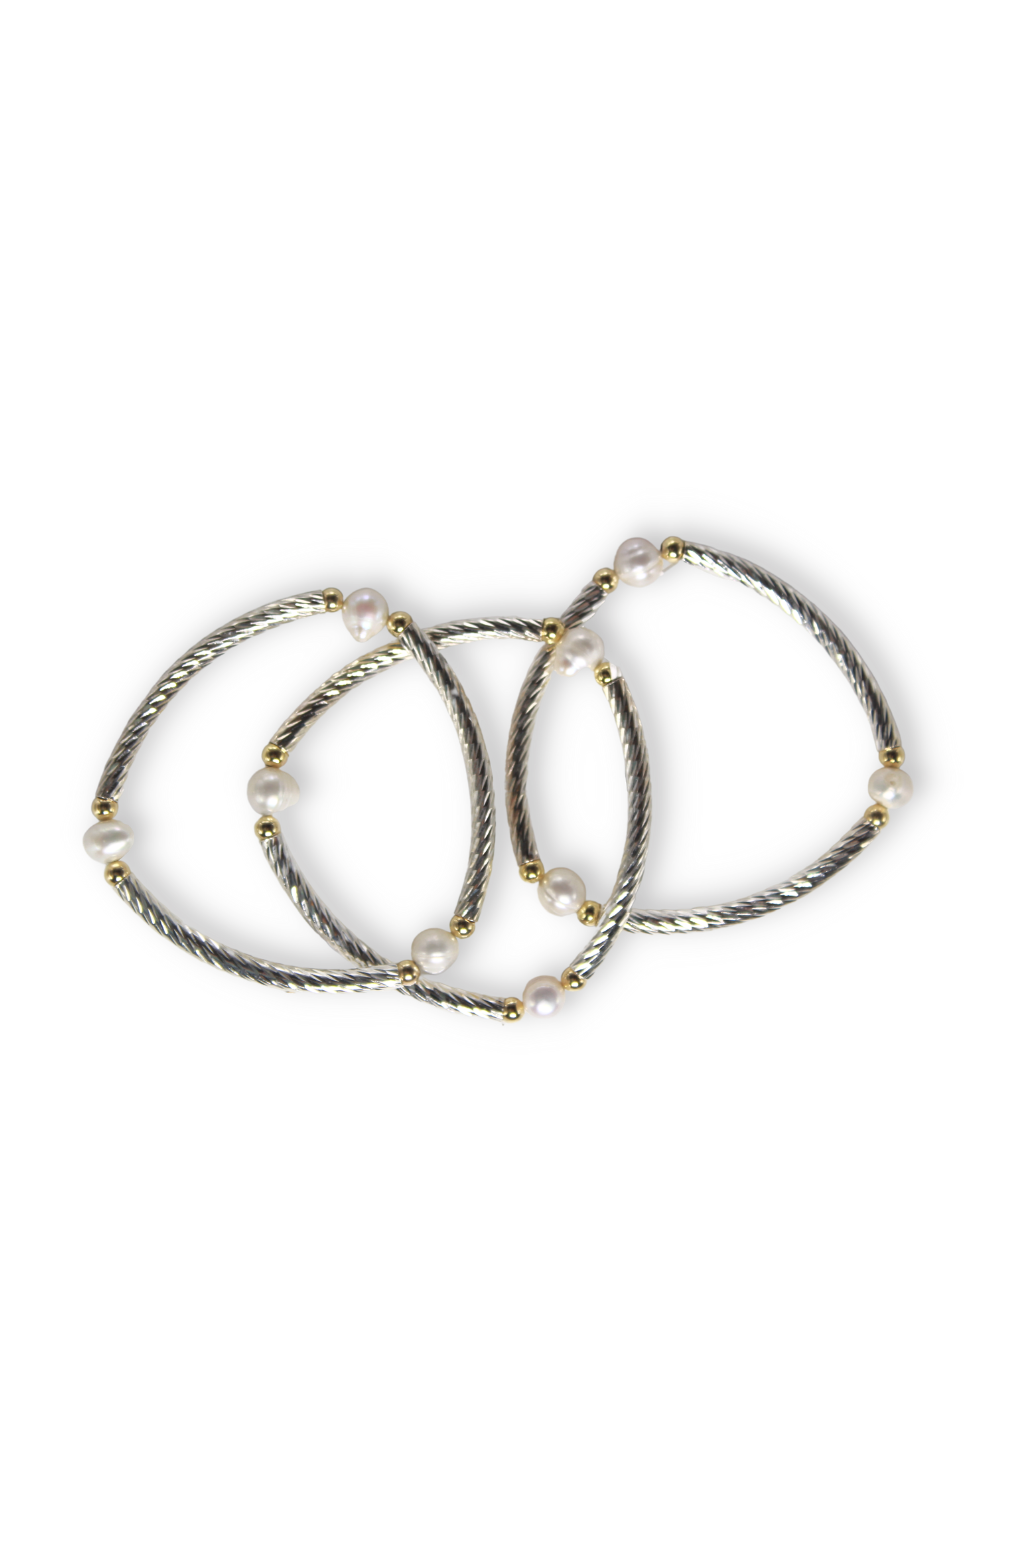 The Pearl Bracelet Singles by Annie Claire Designs - SoSis